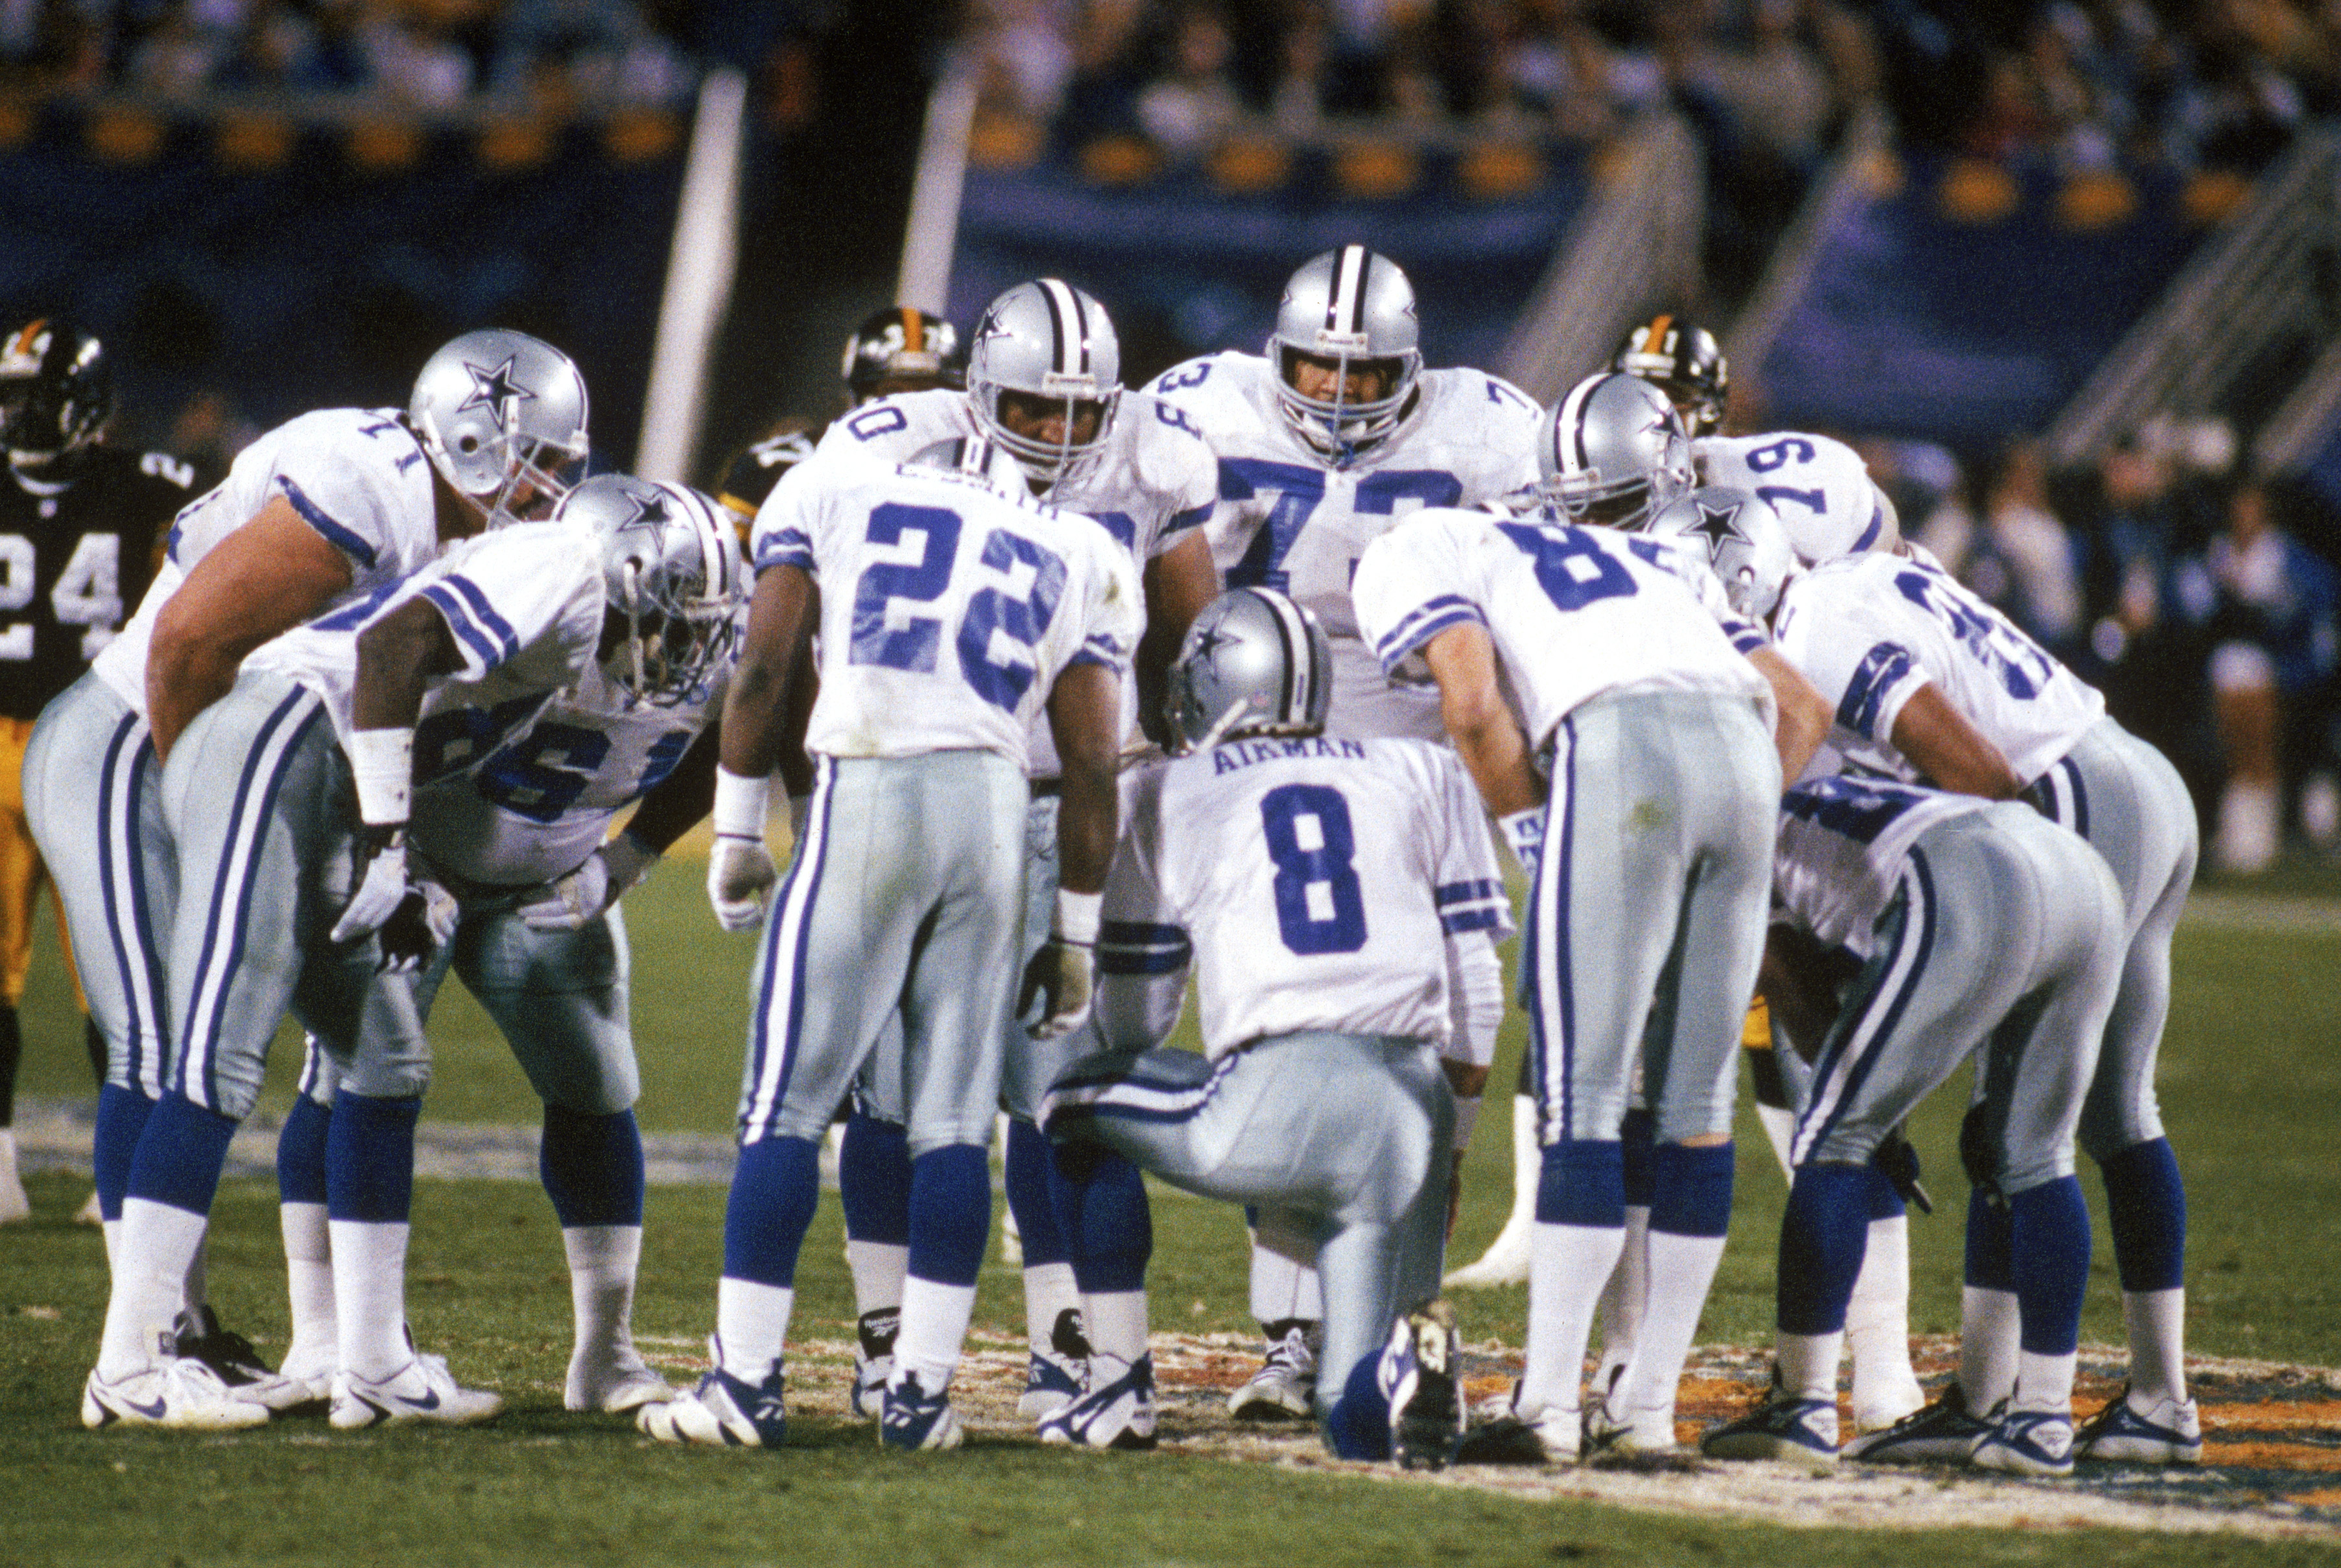 cowboys all time greats